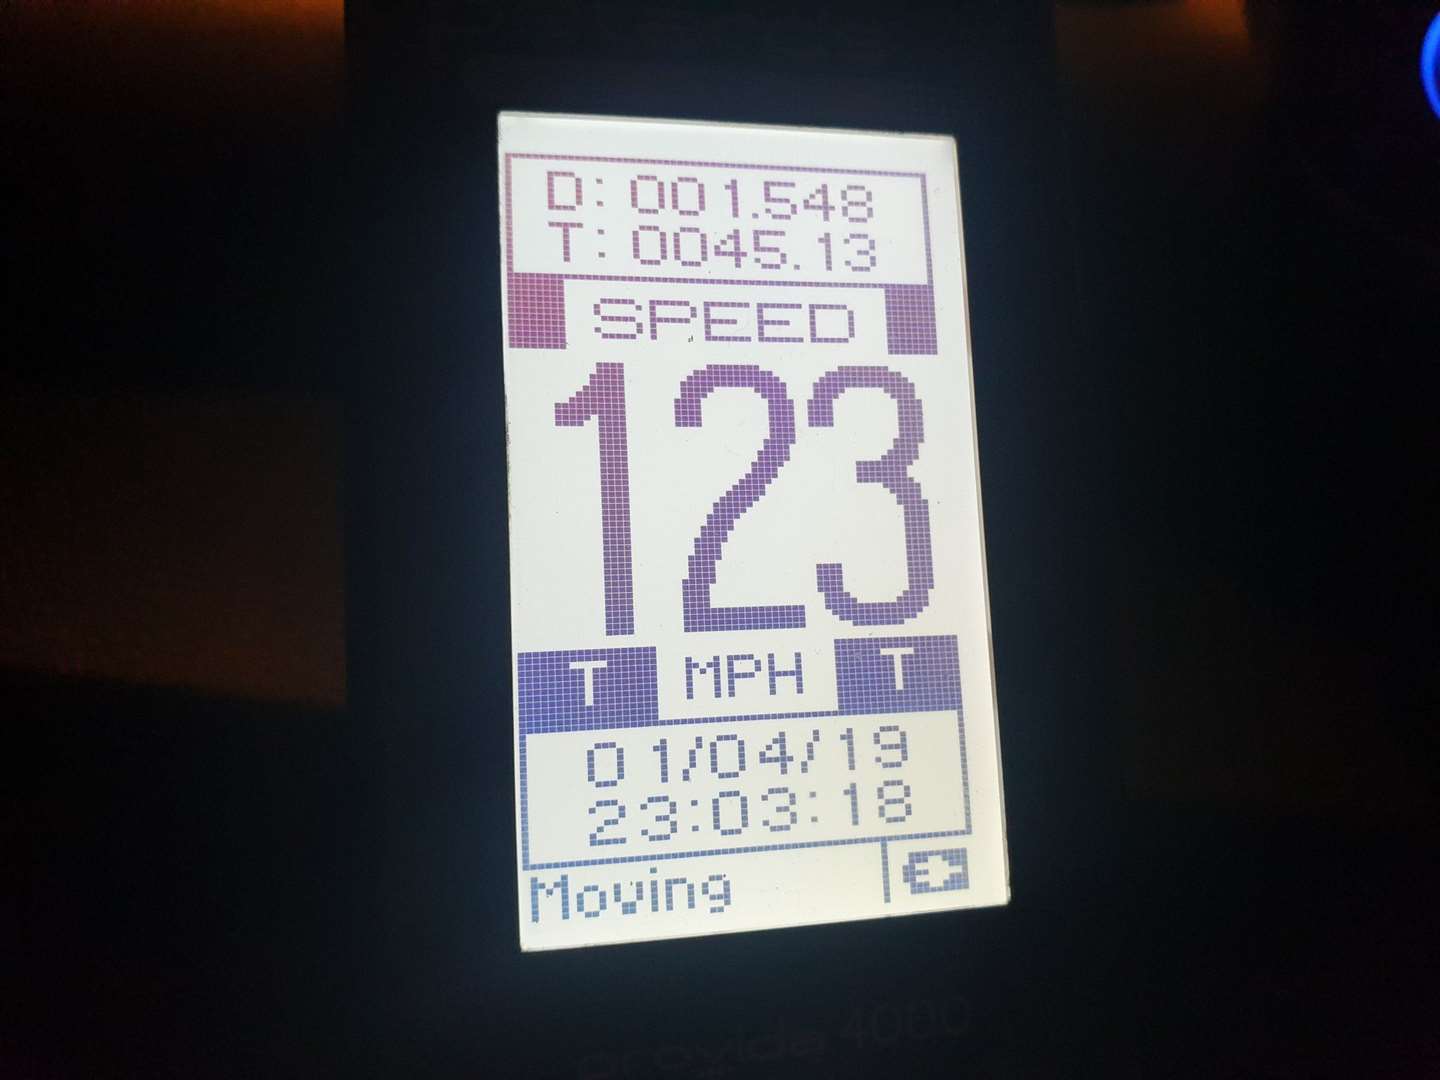 The driver was allegedly doing 123mph (8193650)